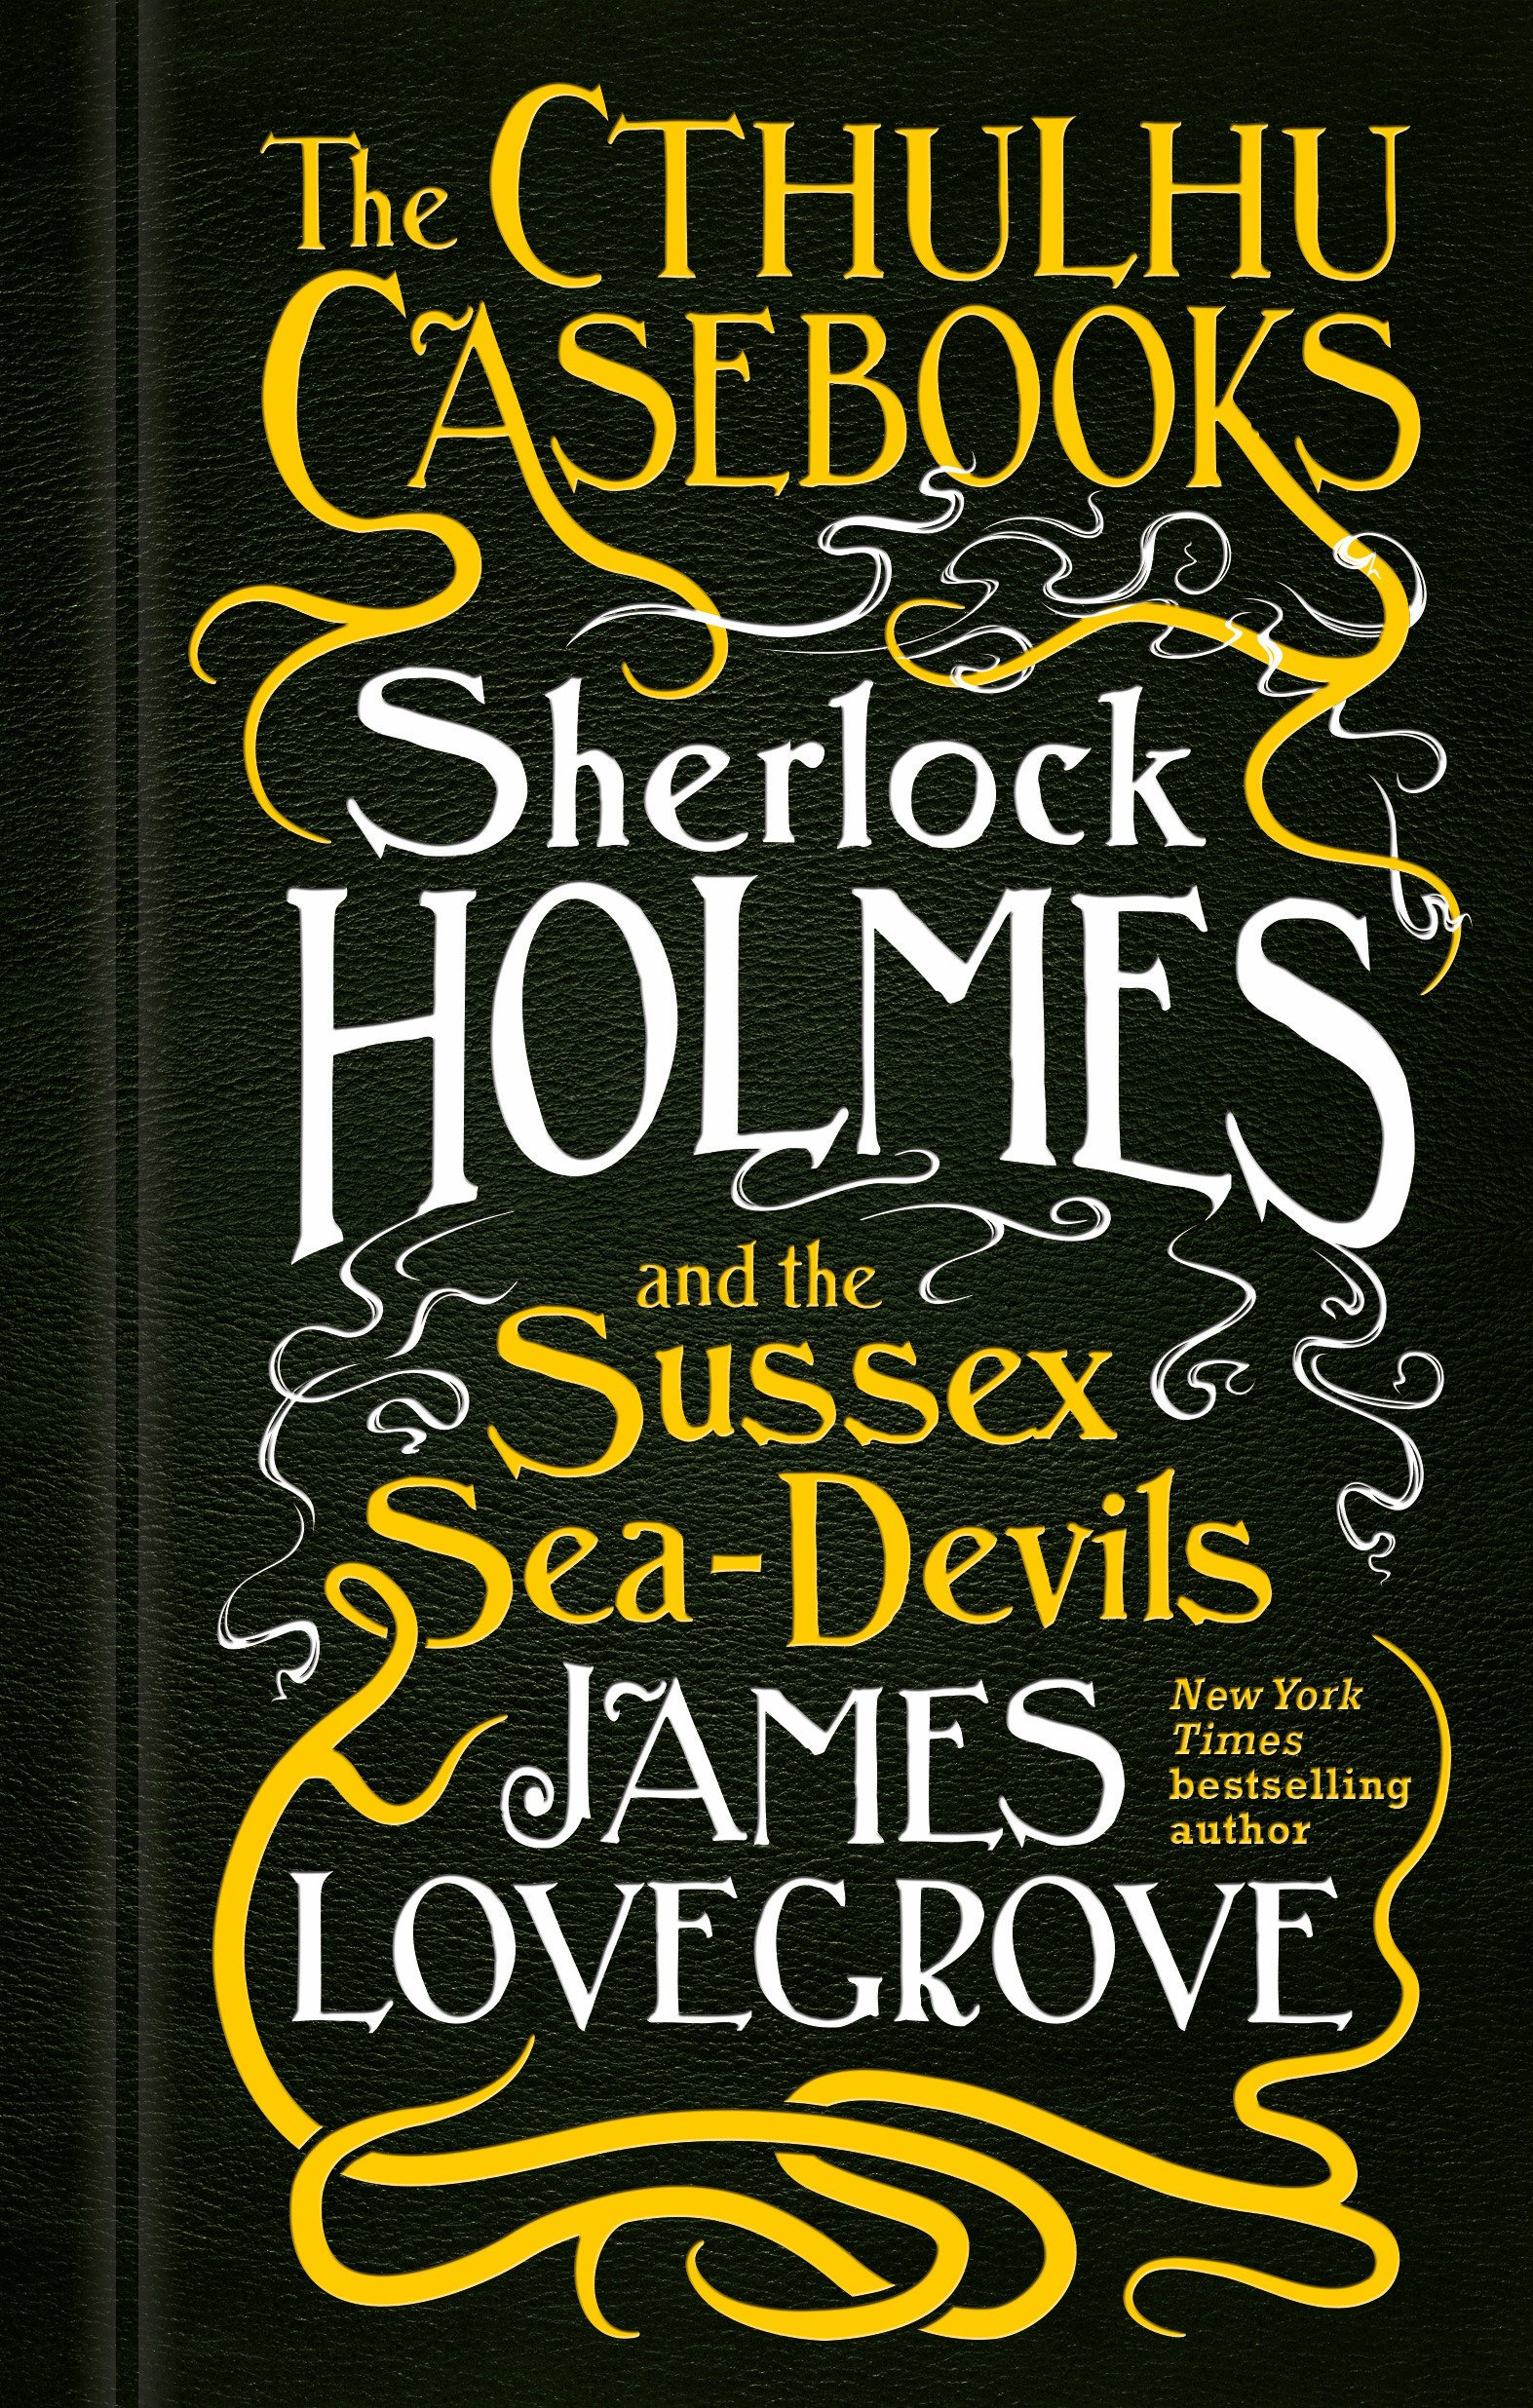 The Cthulhu Casebooks - Sherlock Holmes and the Sussex Sea-Devils | James Lovegrove